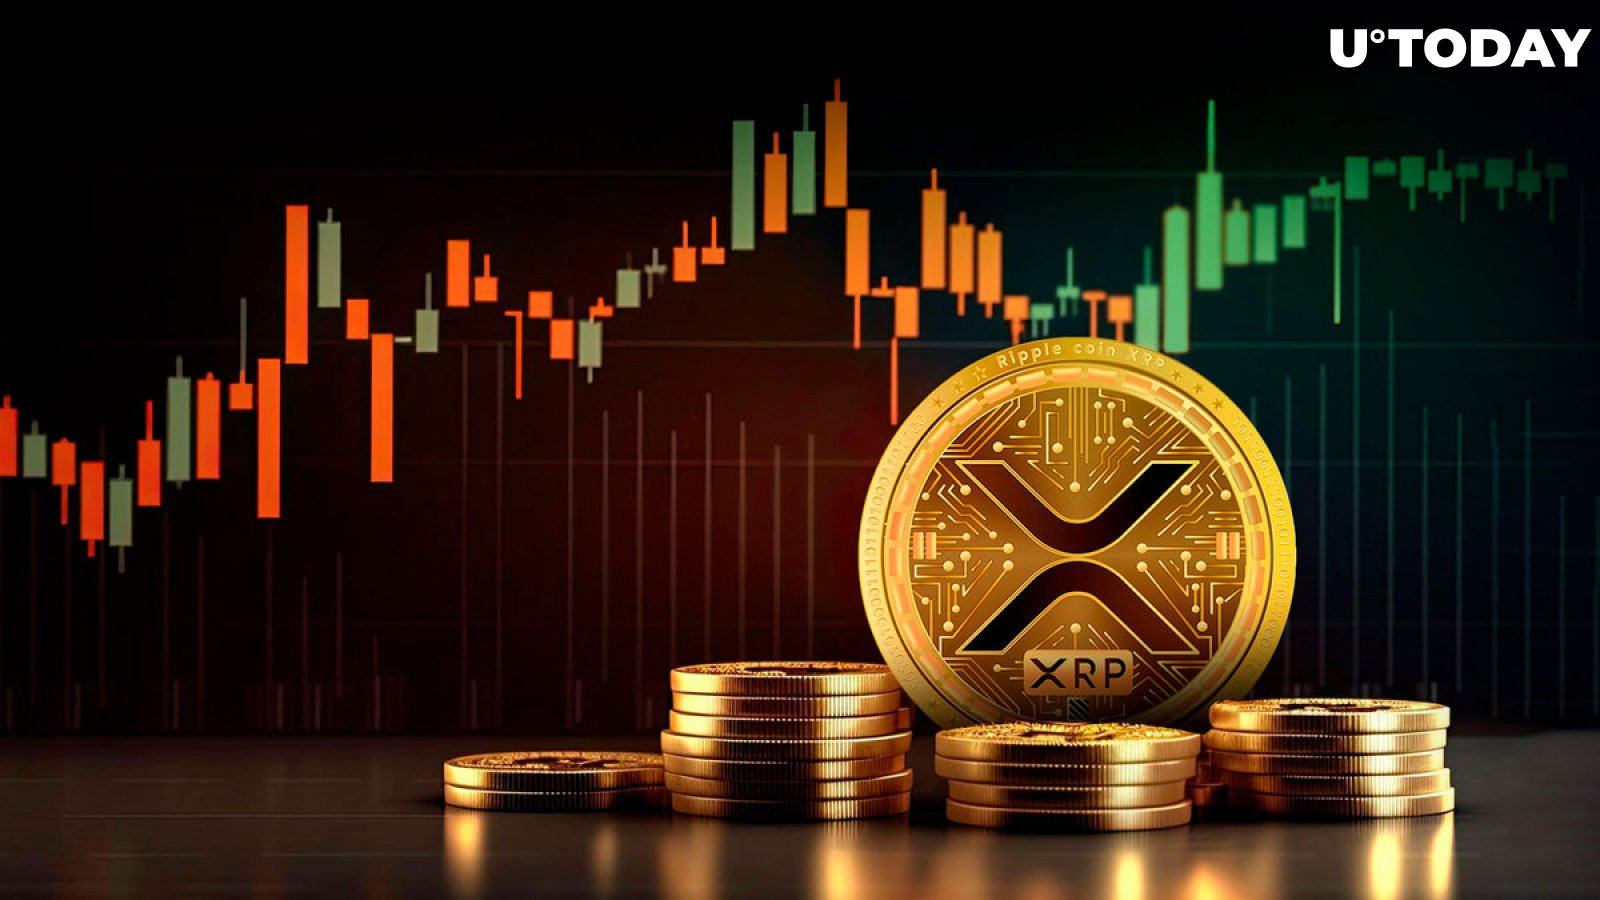 XRP Price Has 3 Ways to Go After Hitting This Resistance